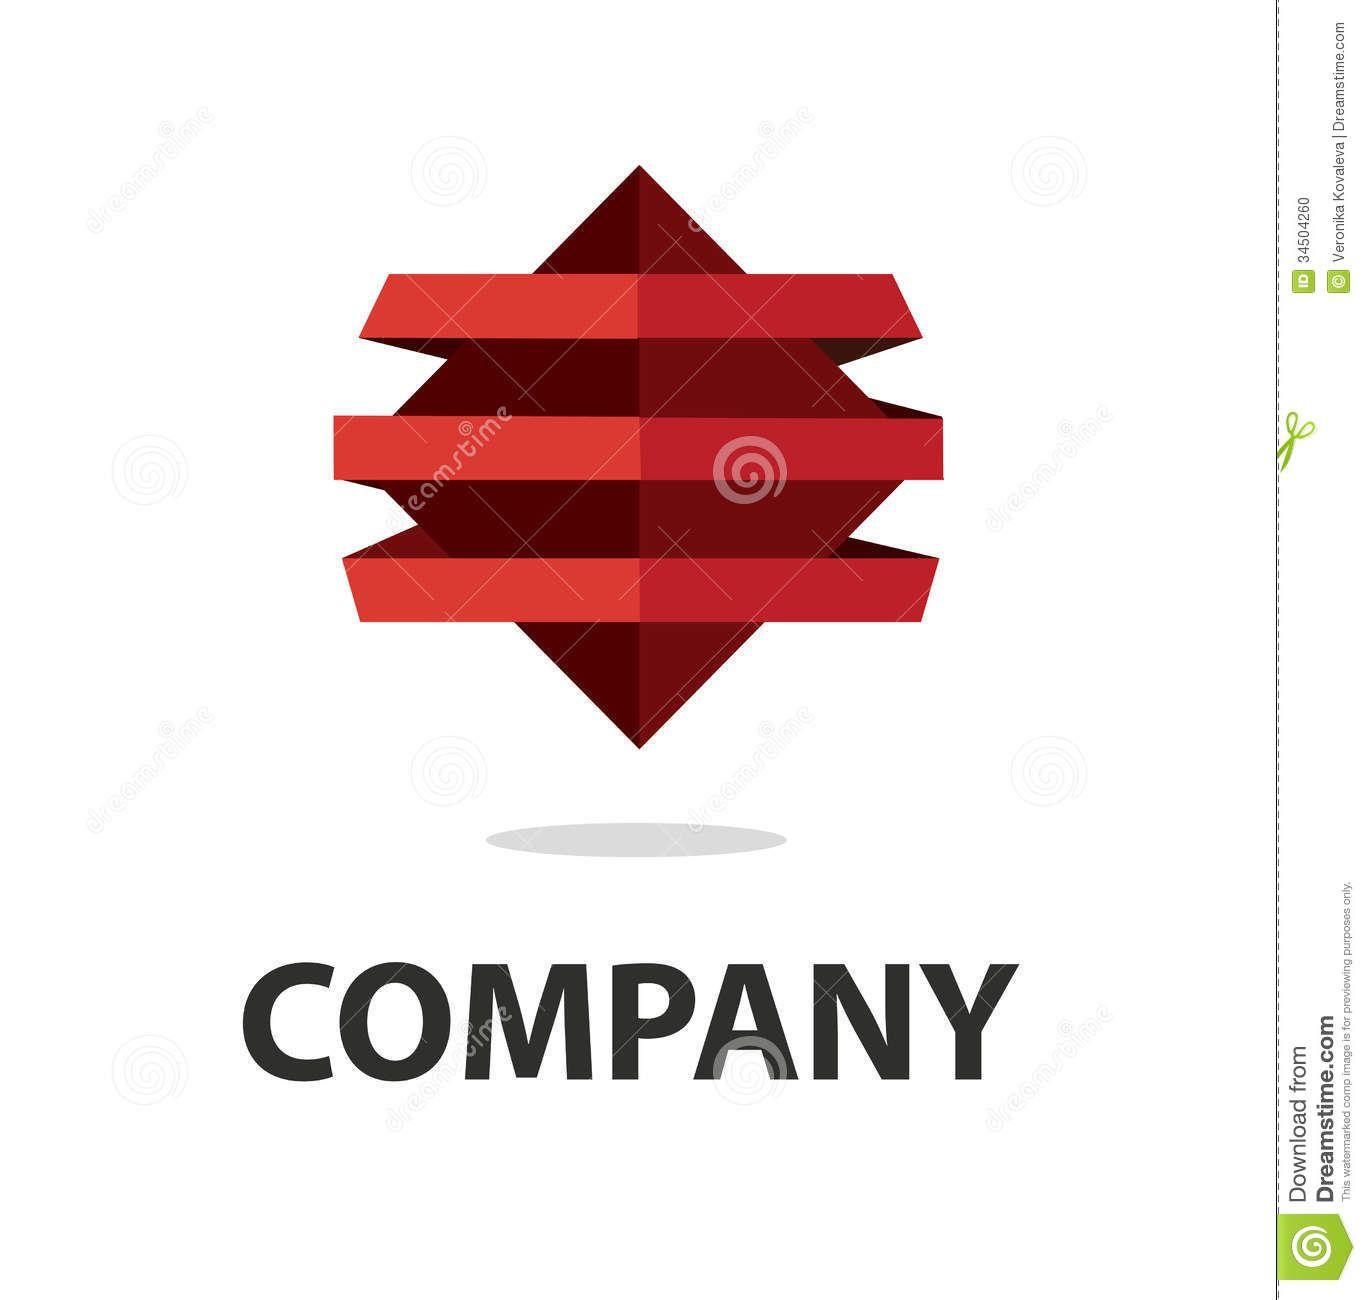 What Goes with Red and White Square Company Logo - Red square Logos